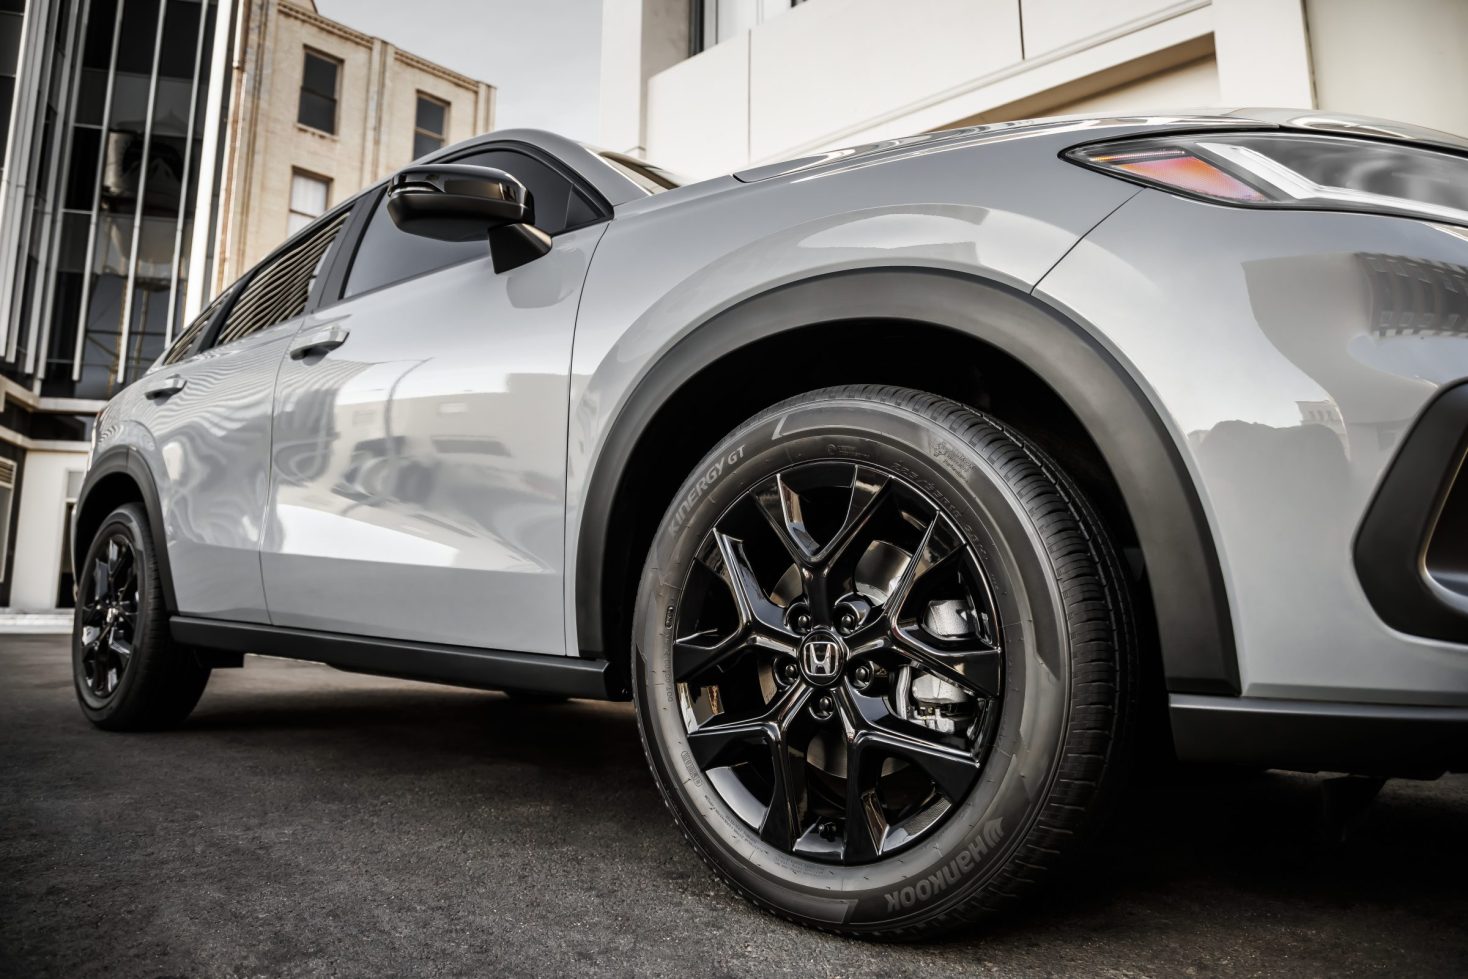 Large Car Tires Versus Small Car Tires: The Pros and Cons of Each Size